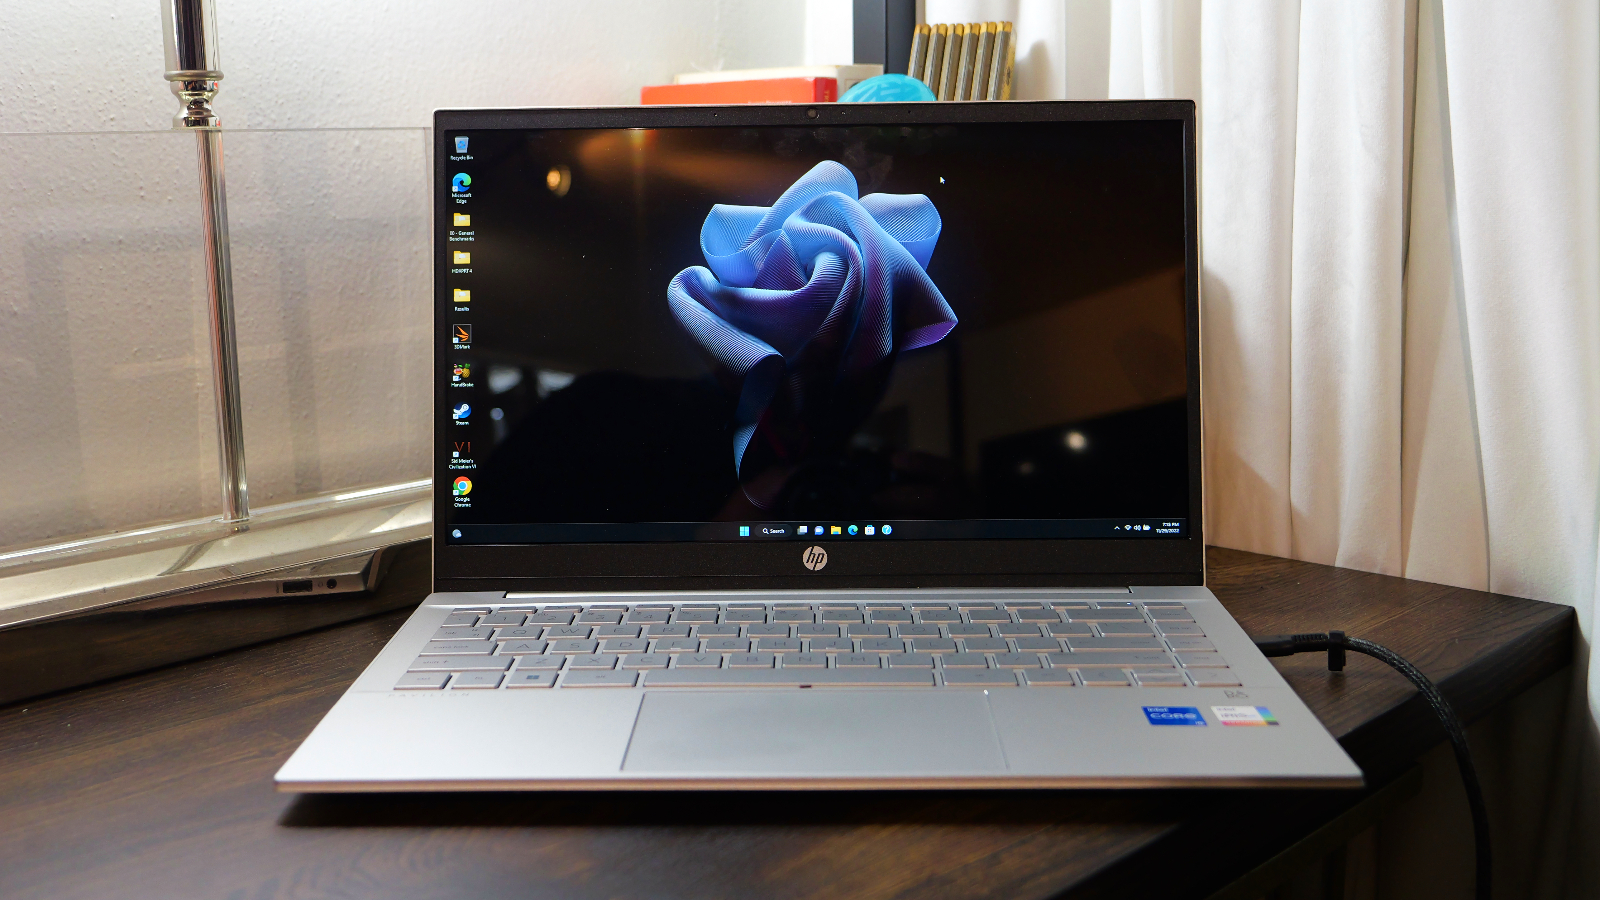 HP Pavilion 14 review: is this popular mid-range laptop a good buy